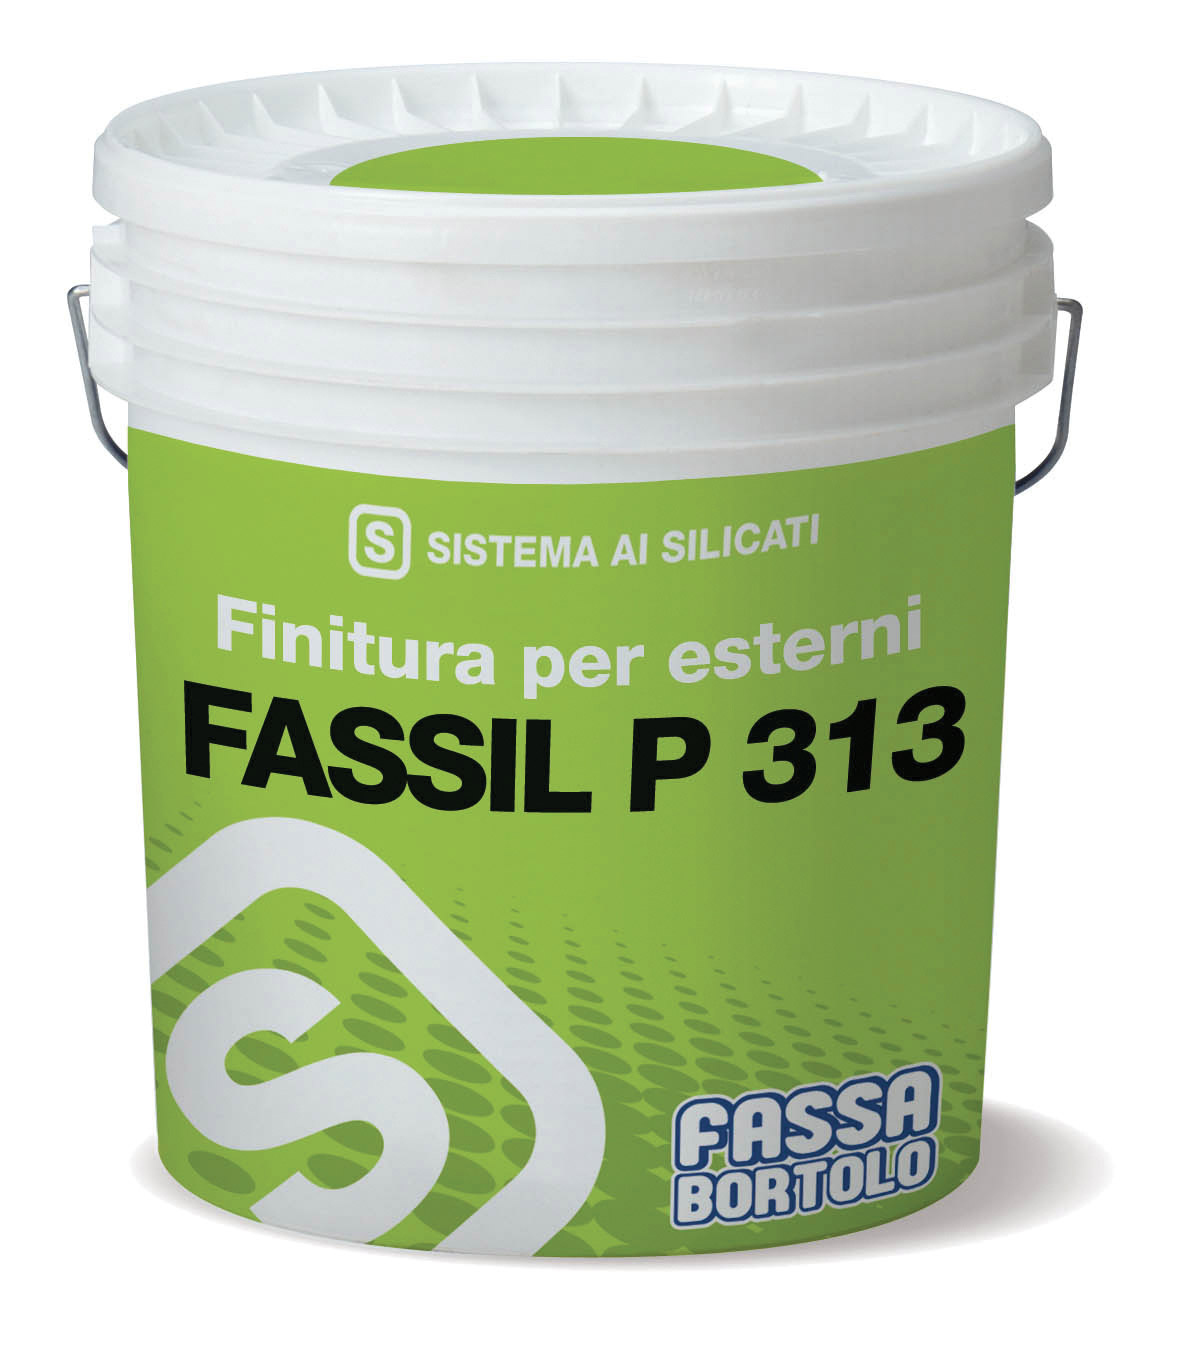 FASSIL P 313: Smooth water-based silicate mineral paint for exteriors and interiors